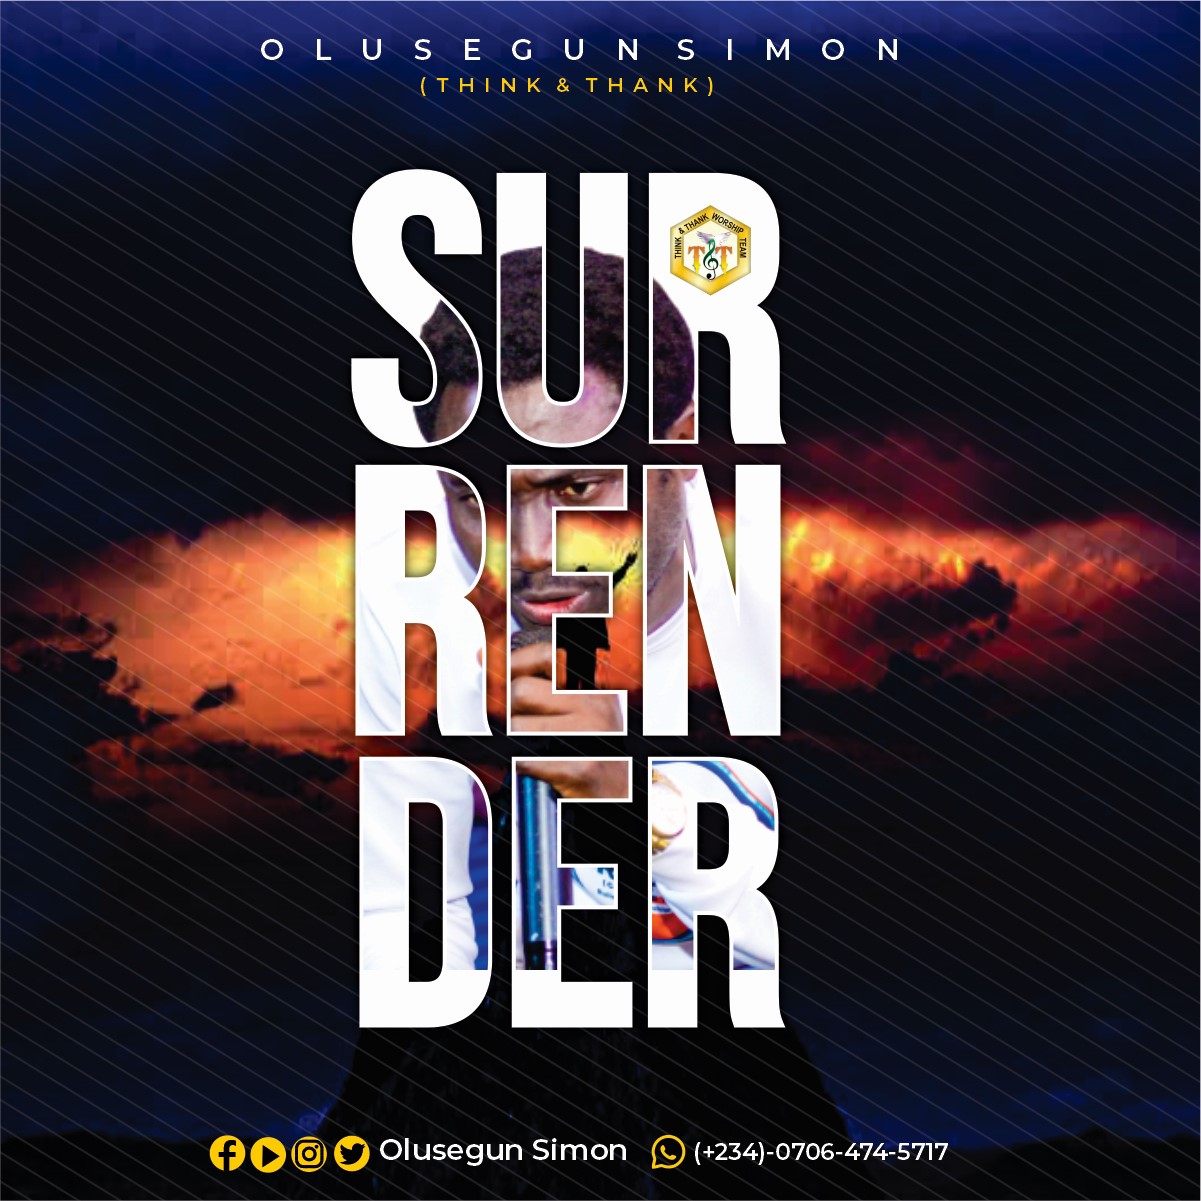 Download Song: SURRENDER by Olusegun Simon 16